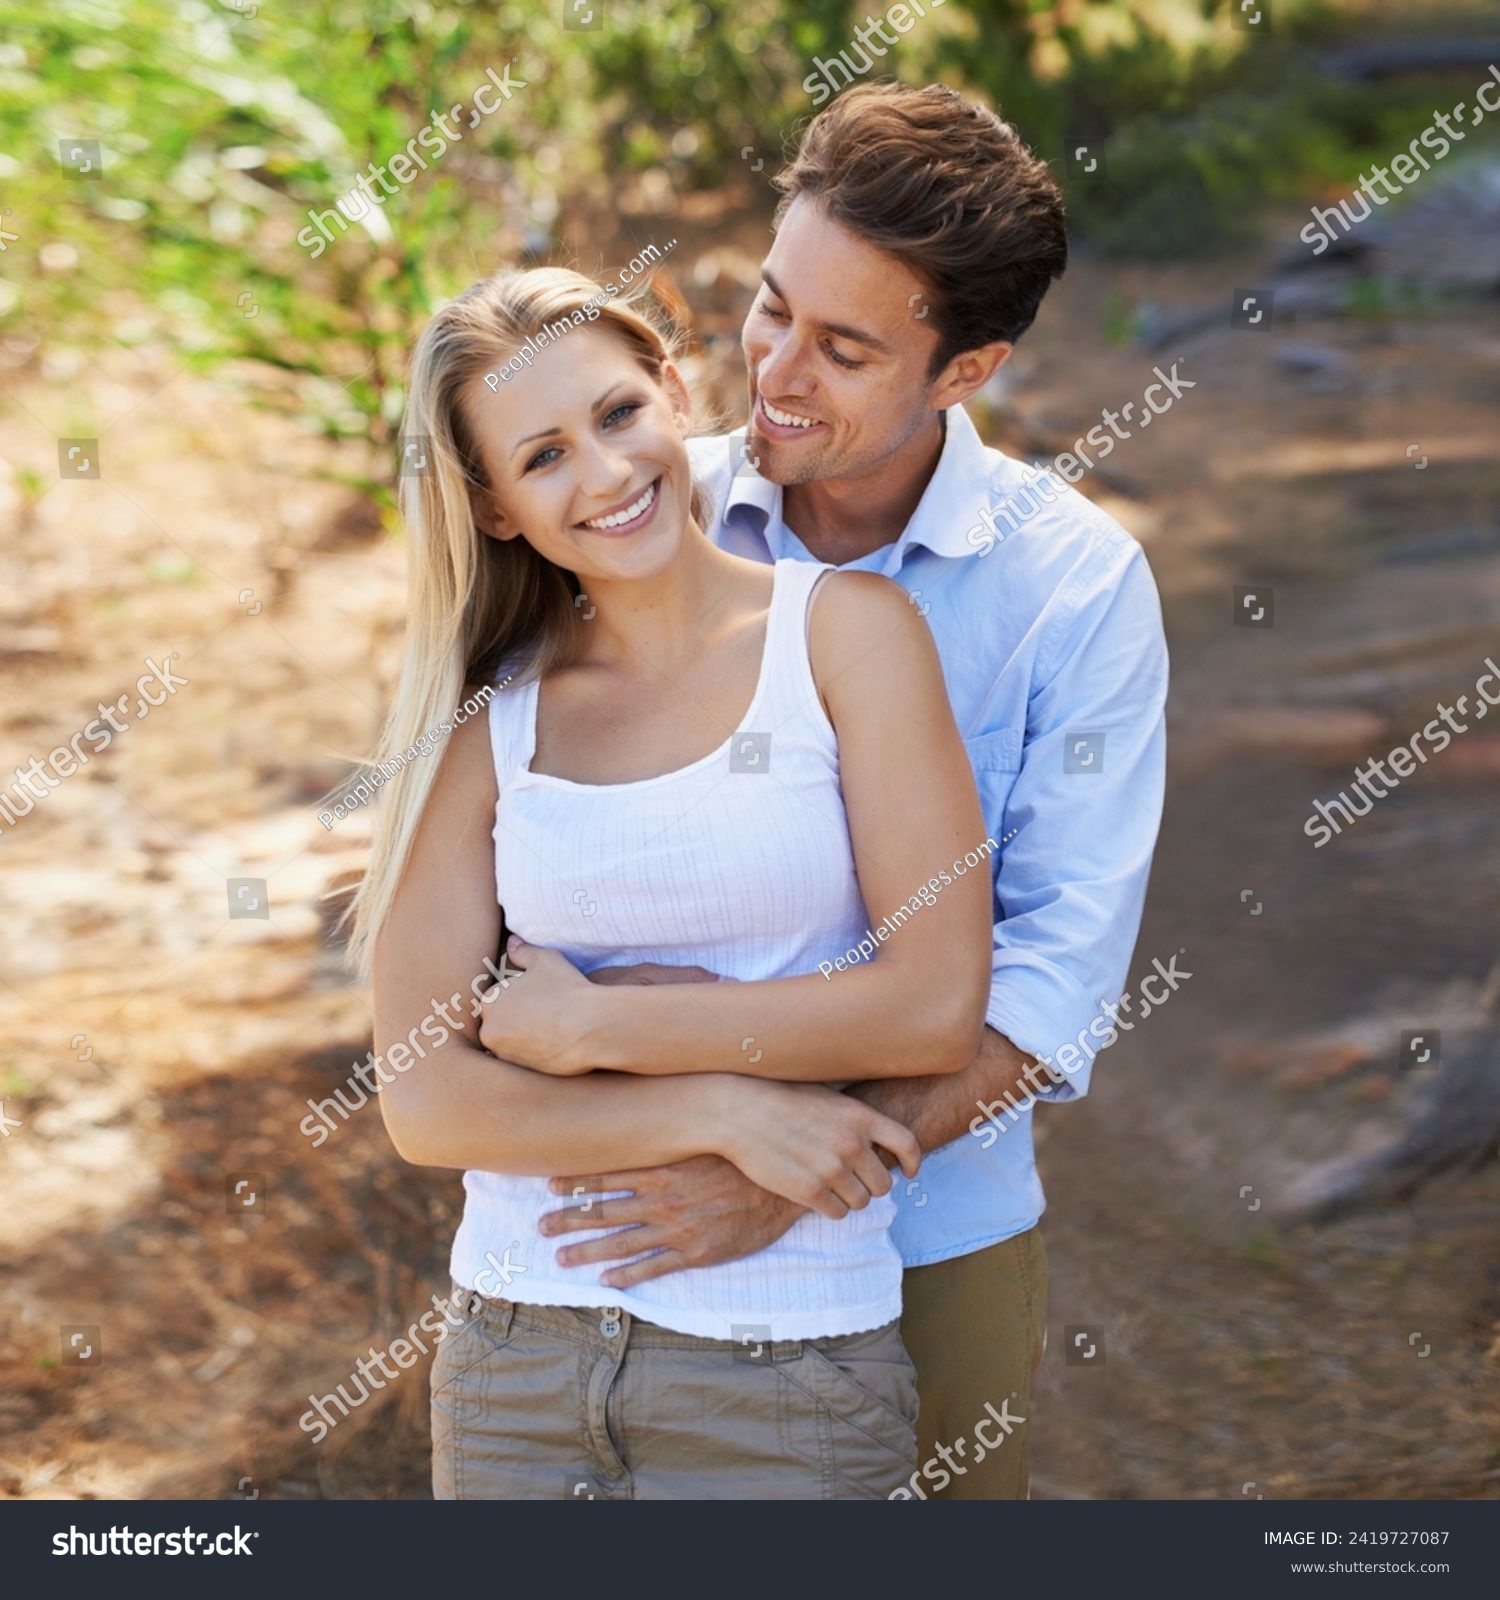 Nature portrait, love and happy couple hug for support, romantic care and relationship security with marriage partner. Embrace, wellness and relax outdoor man, woman or people smile for forest date #2419727087